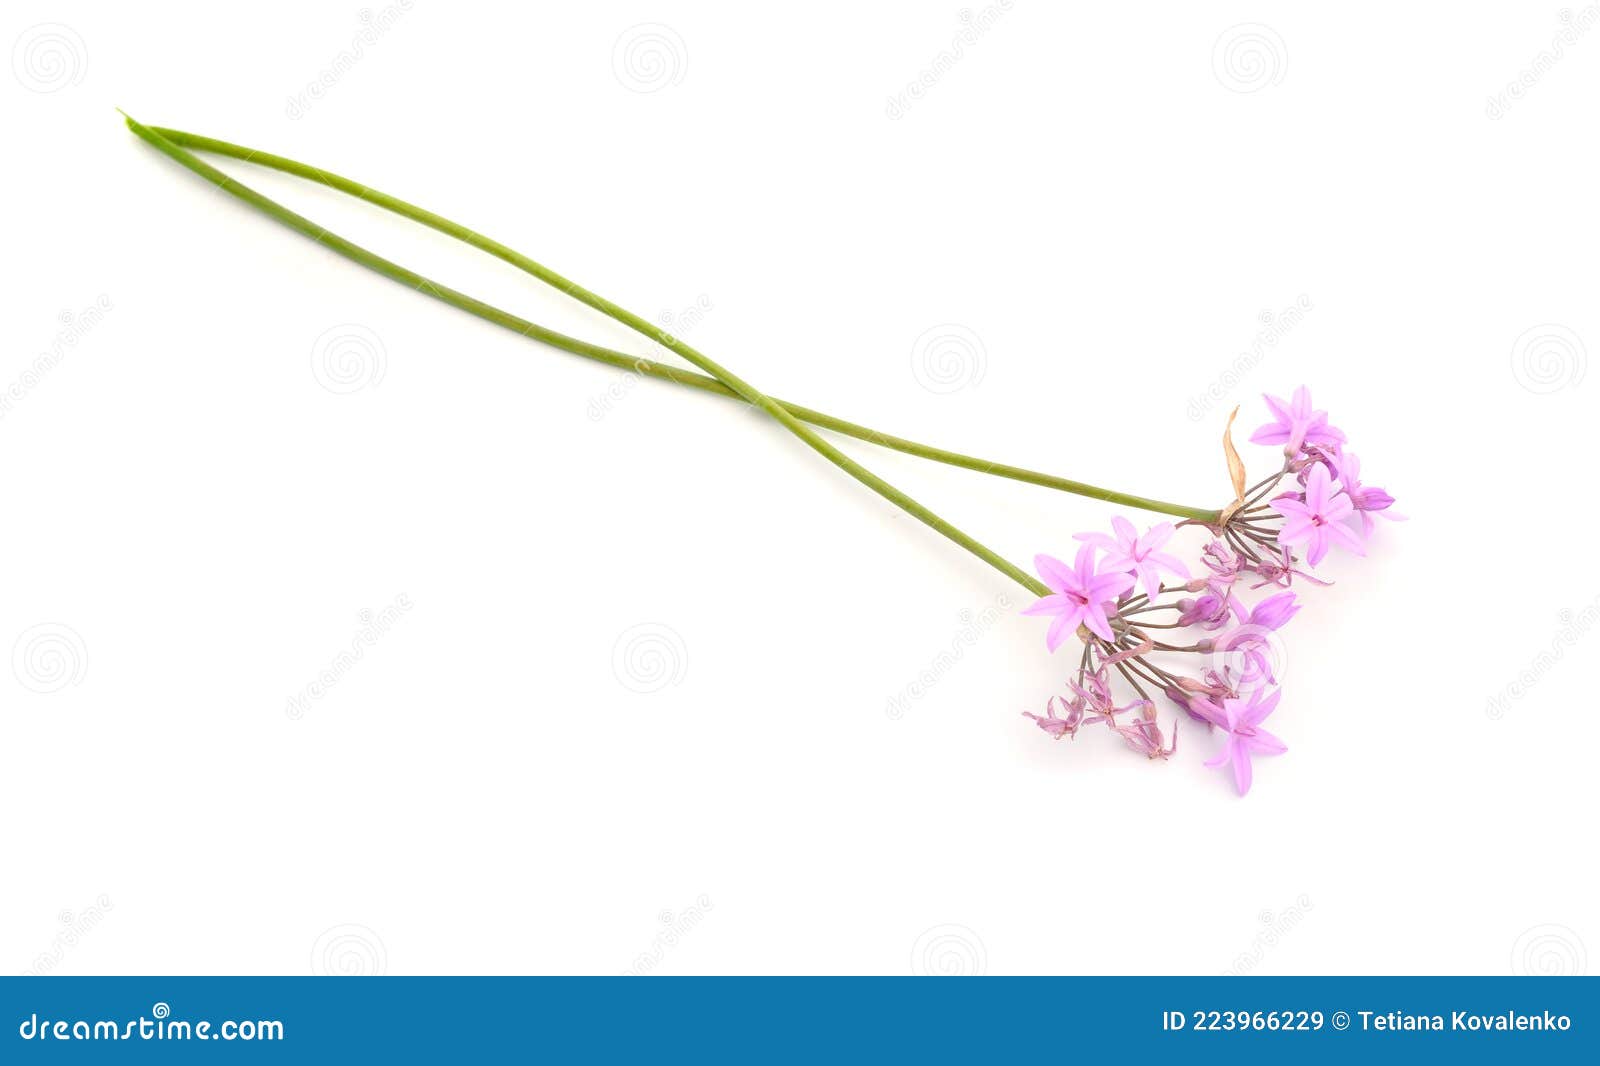 Tulbaghia Violacea, Known As Society Garlic, As Pink Agapanthus, Wild ...